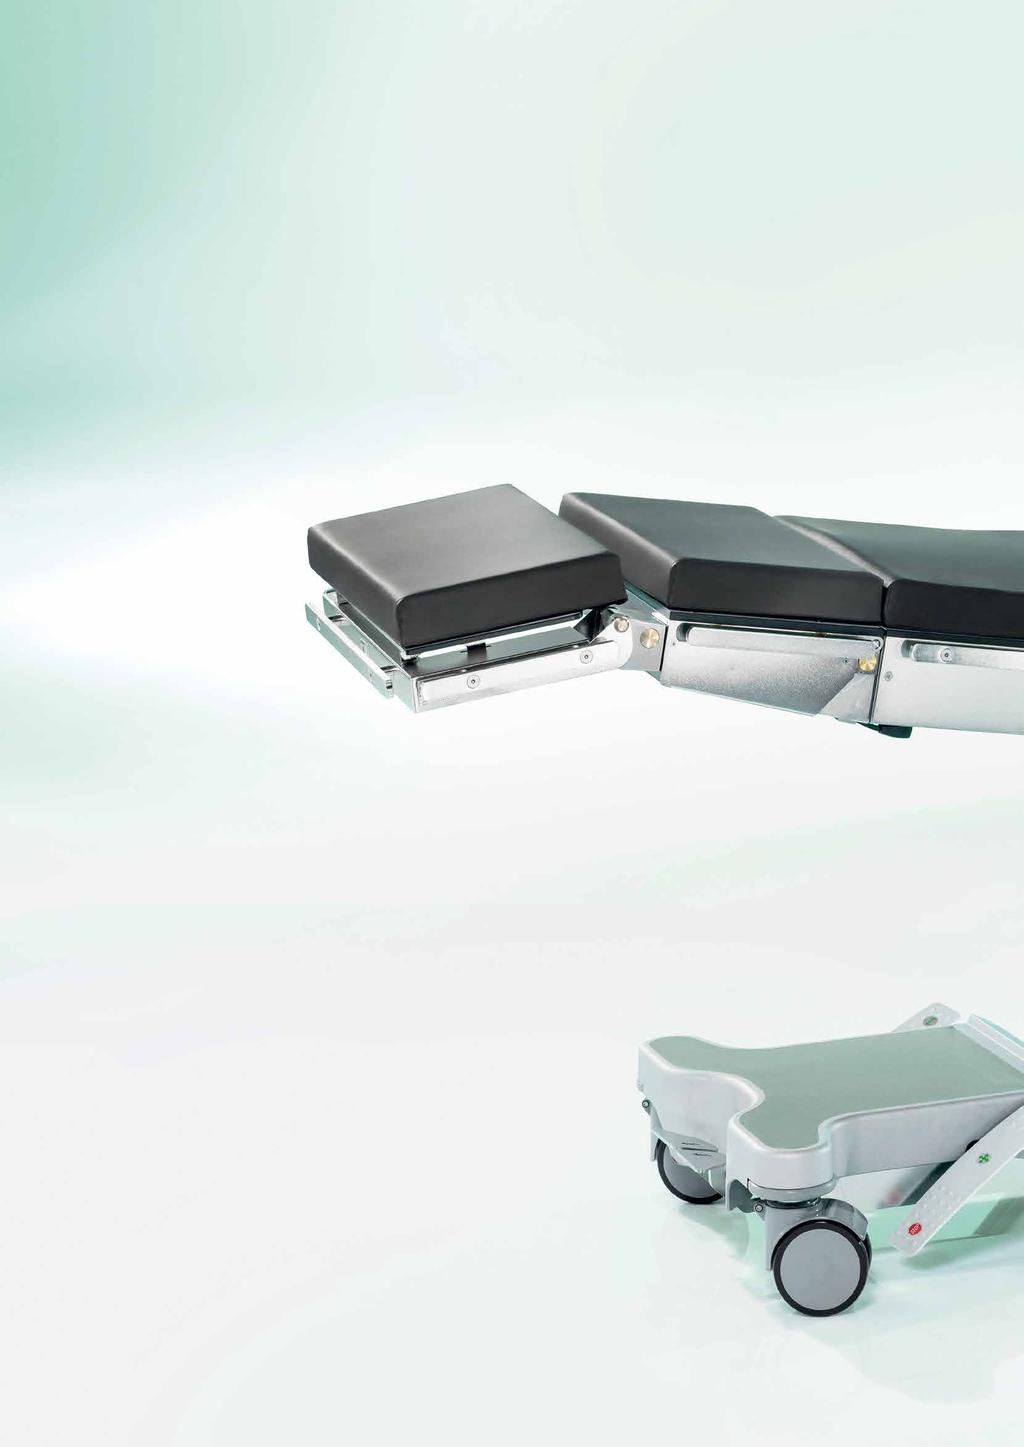 DIAMOND Comfort and reliability in surgery The table meeting your standards Reliable in its tasks